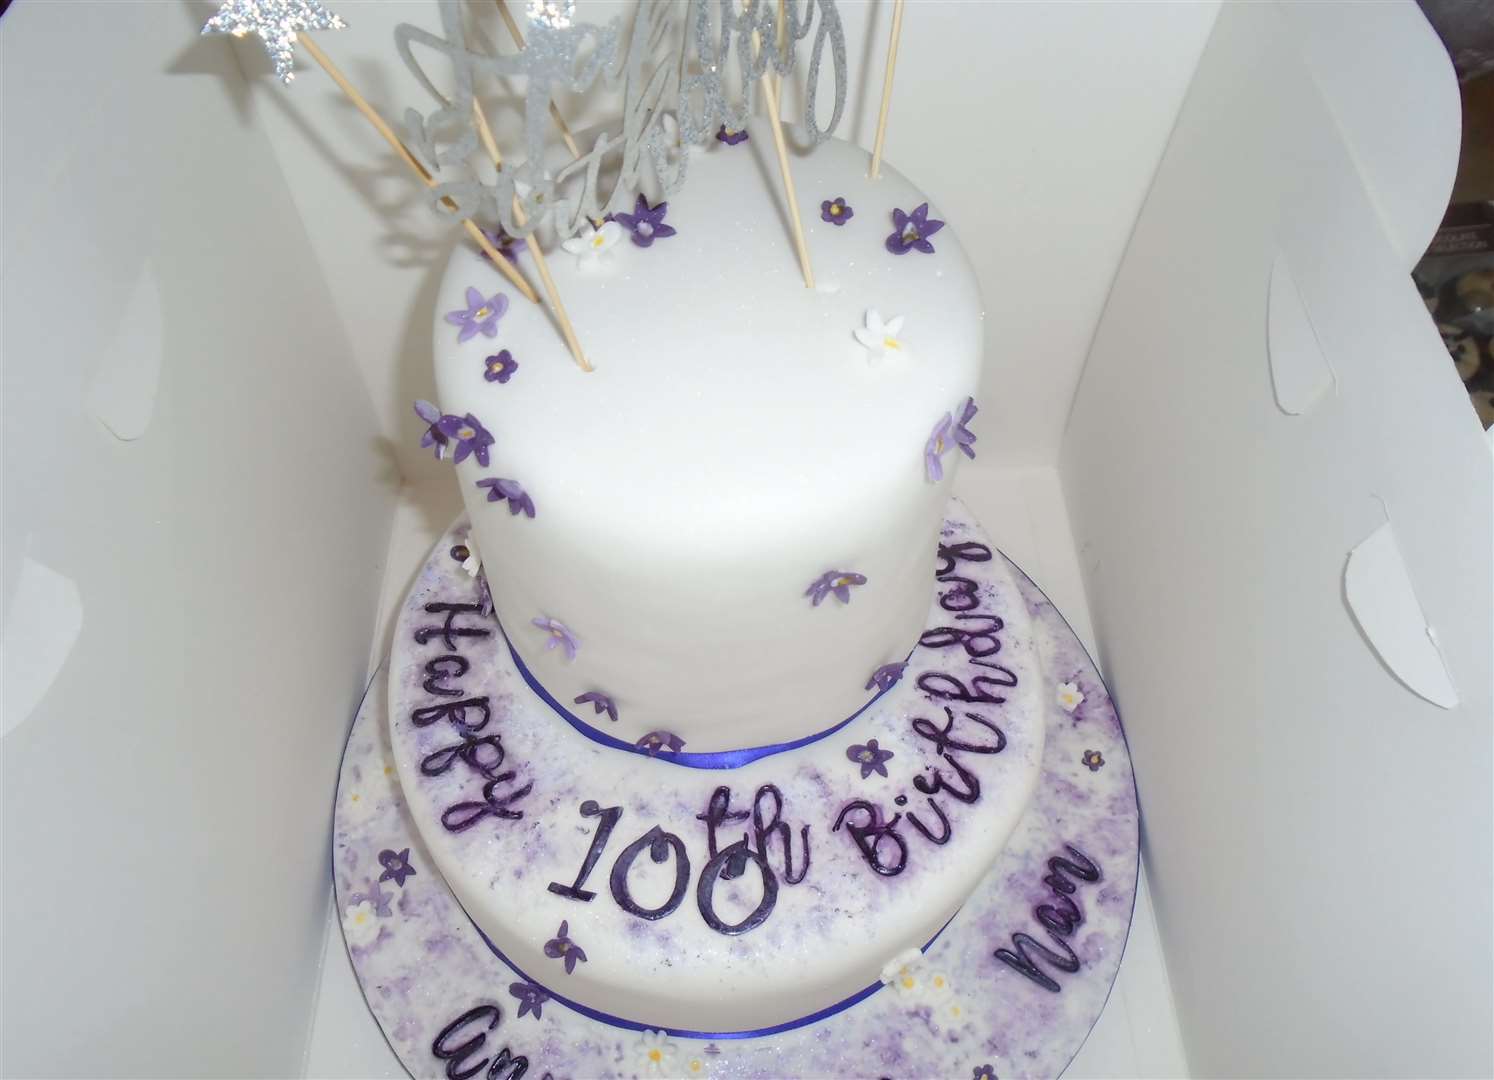 A beautiful cake helped with the celebrations. Picture: Gardenia House